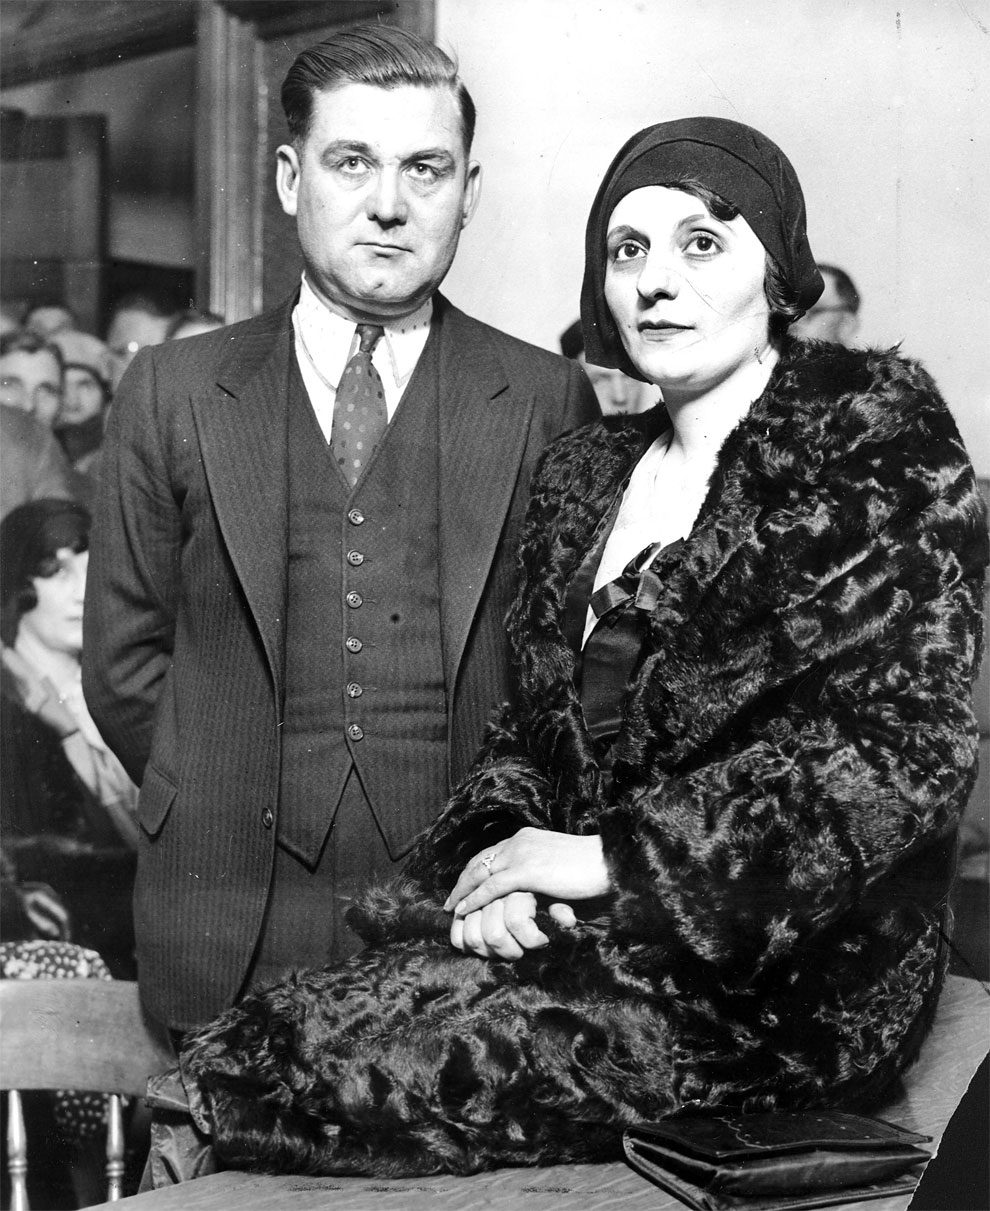 George (Bugsy) Moran, Chicago gangster, on trial at Waukegan, Illinois on December 11, 1930. Charged with vagrancy, he is being named one of Chicago’s “Public Enemies”. Vehemently denied in court the charges, and declared himself a business man. His wife was with him in court and was twice in tears during the arguments